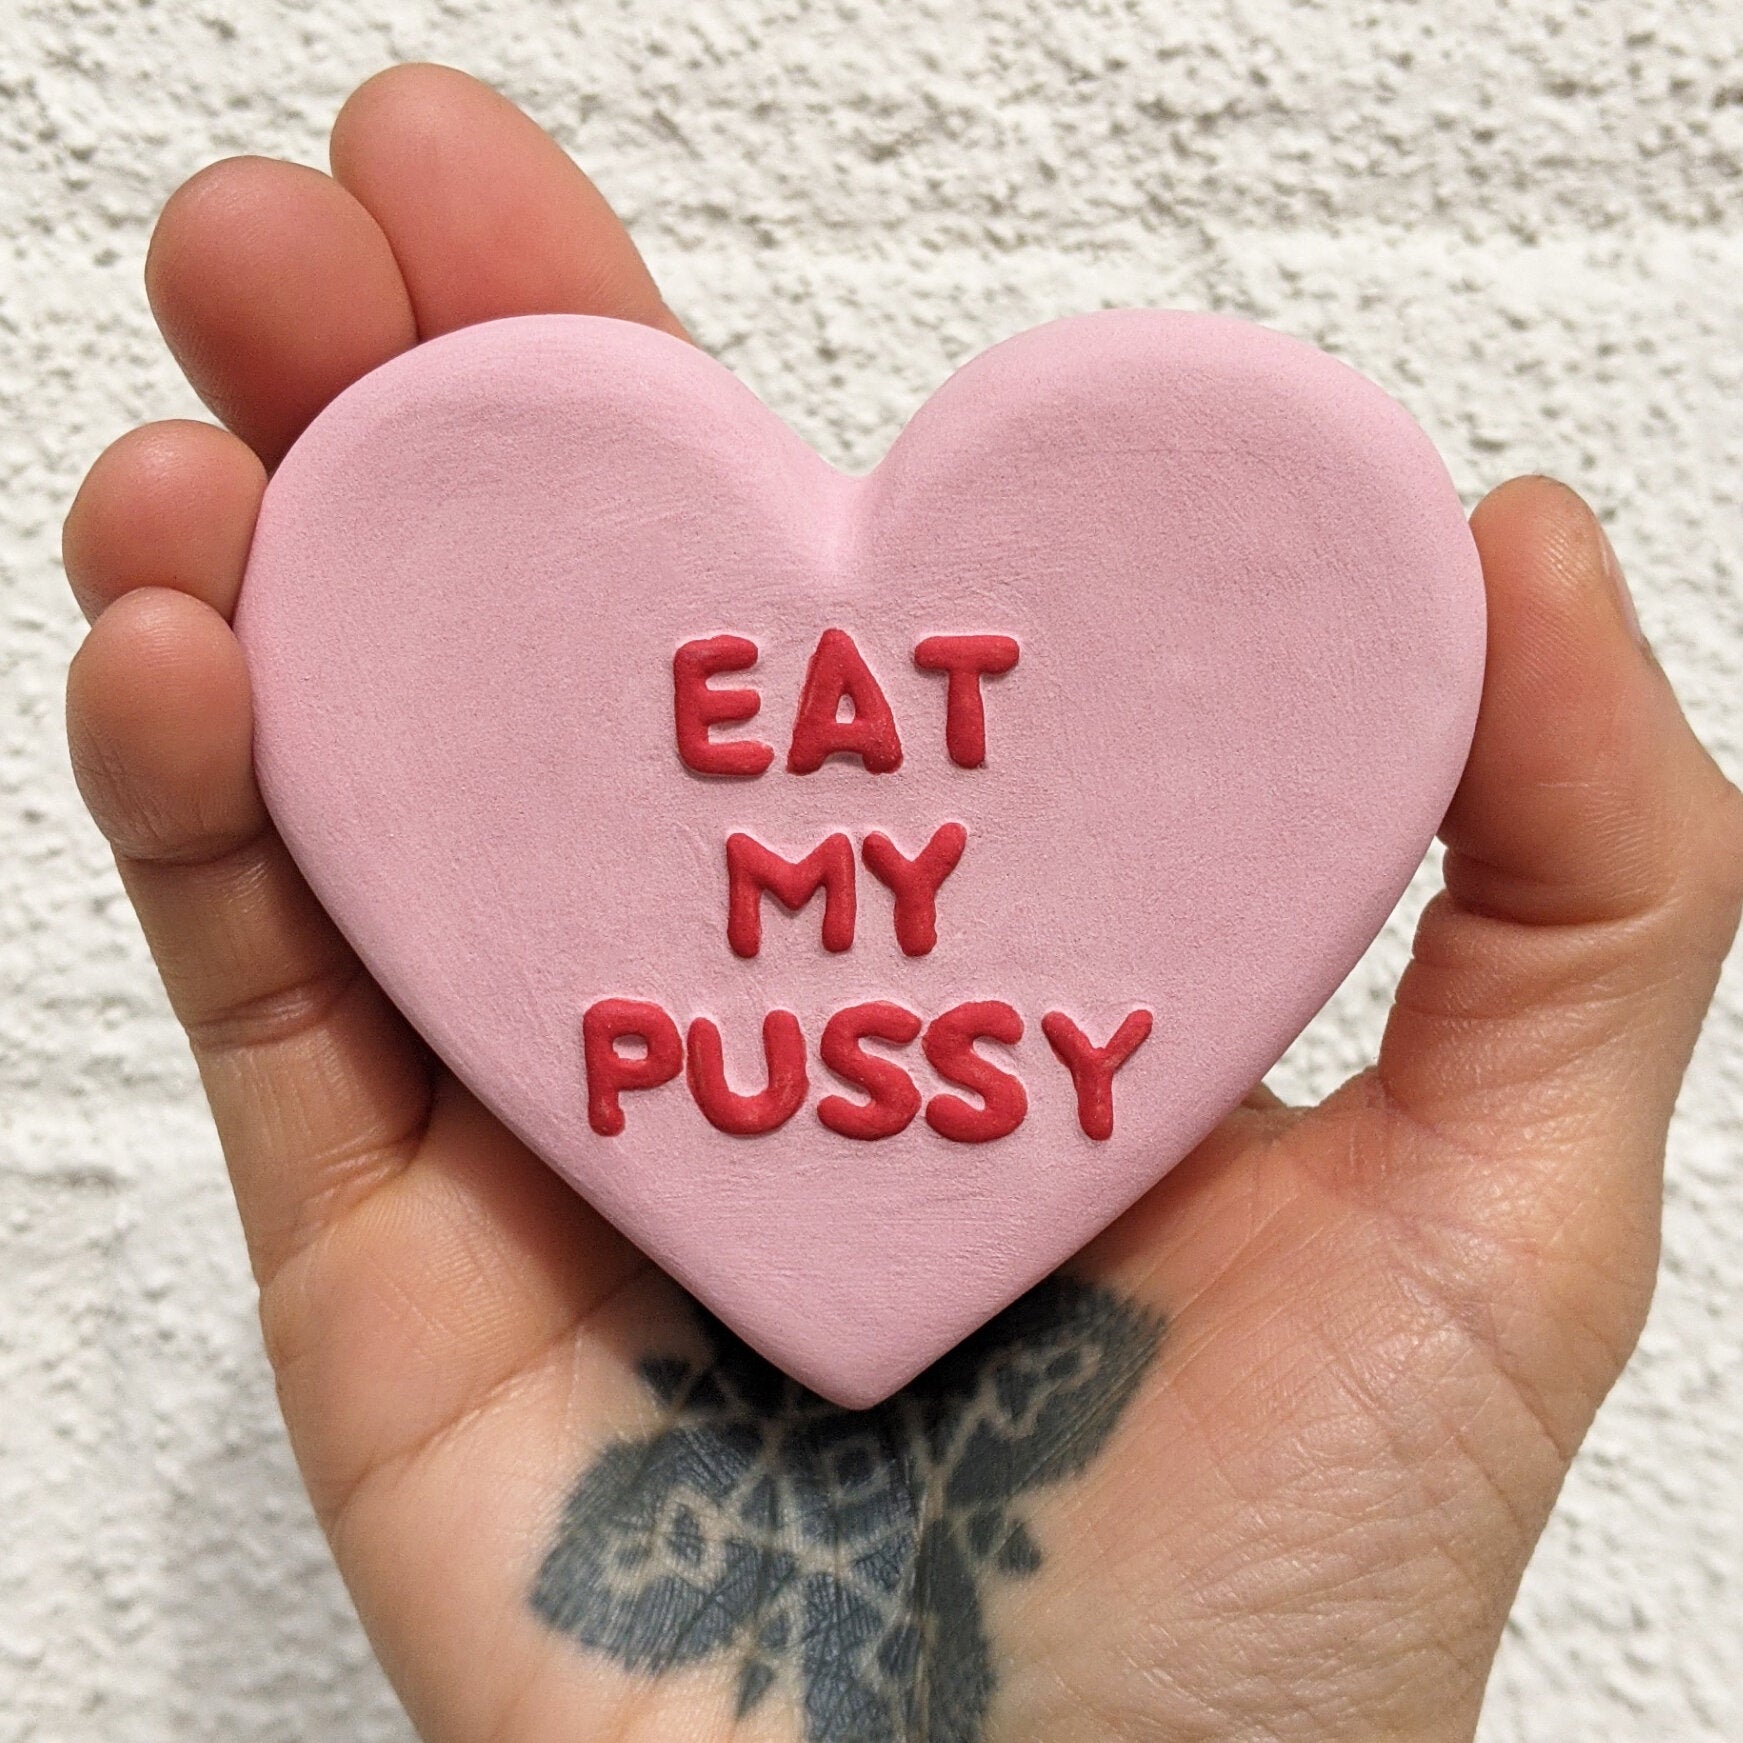 antoine rivers recommends come eat my pussy pic